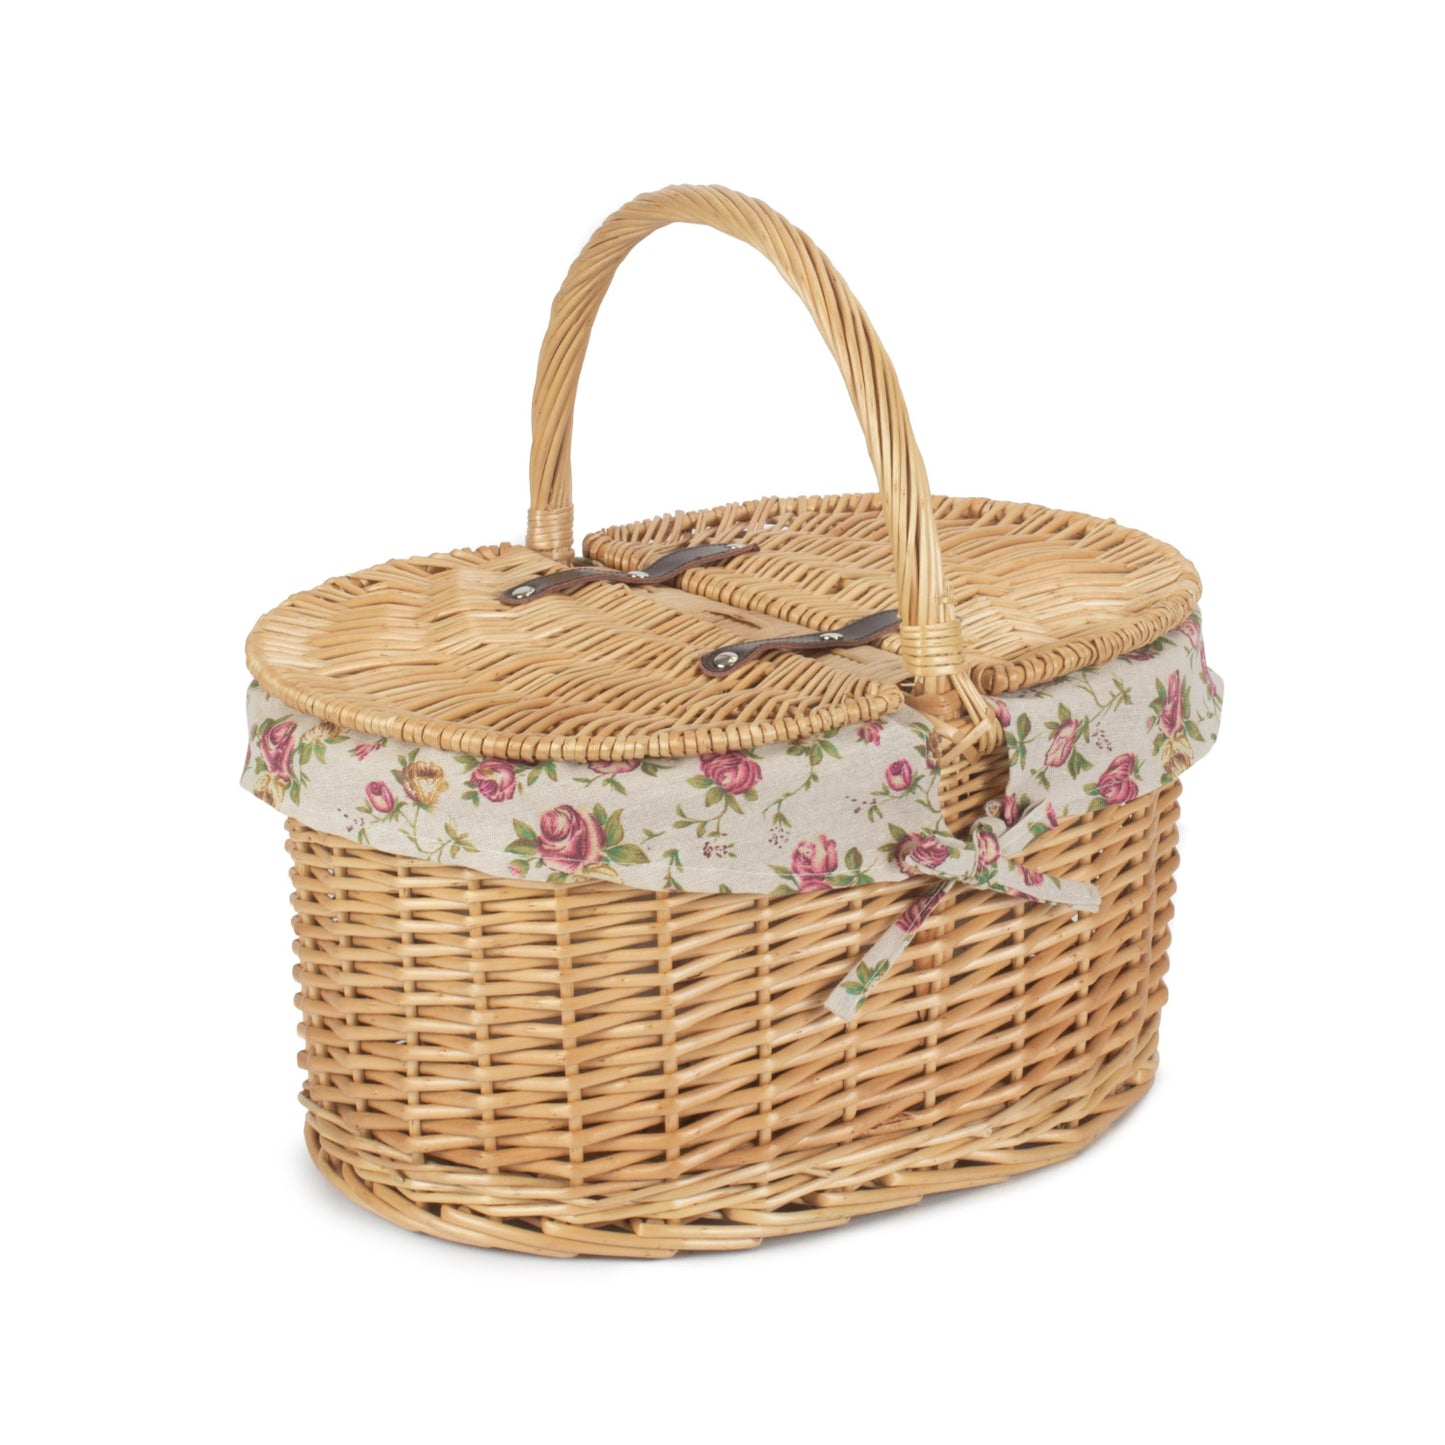 Buff Oval Picnic Basket With Garden Rose Lining